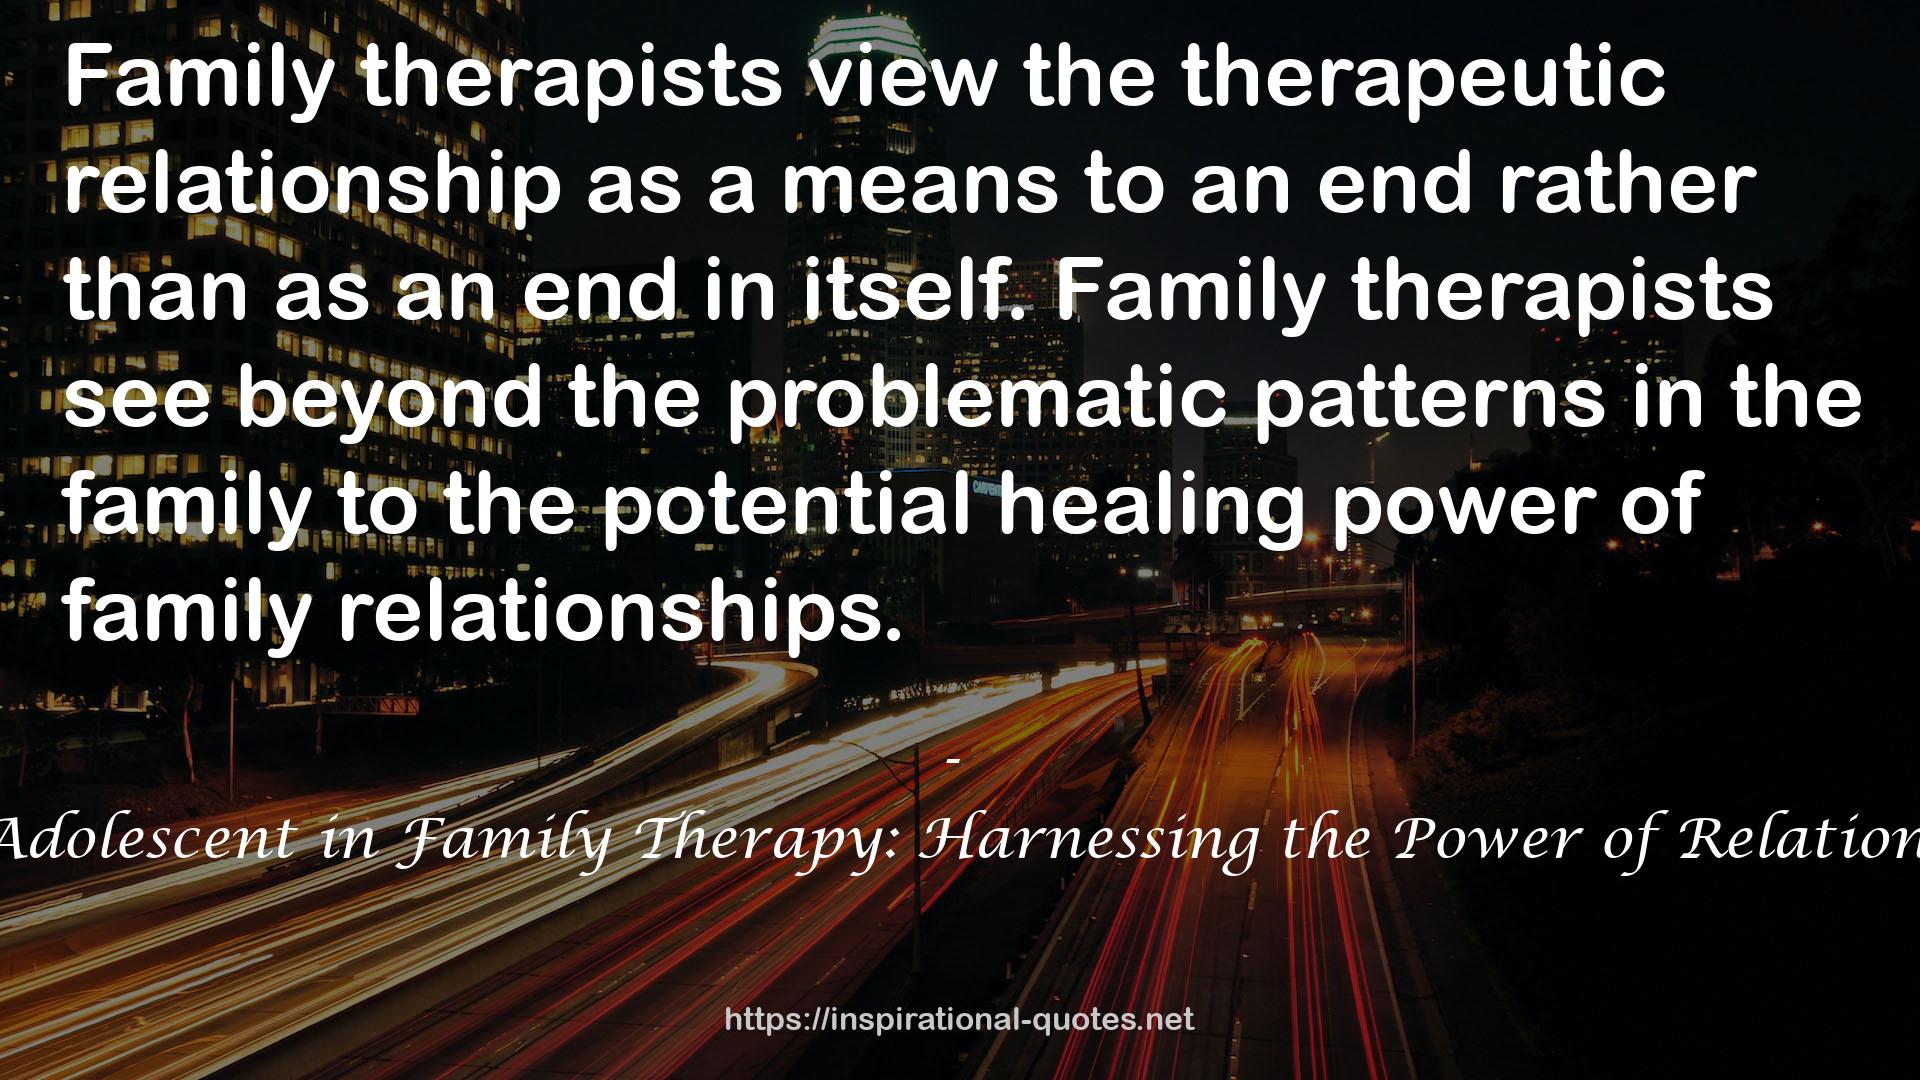 The Adolescent in Family Therapy: Harnessing the Power of Relationships QUOTES